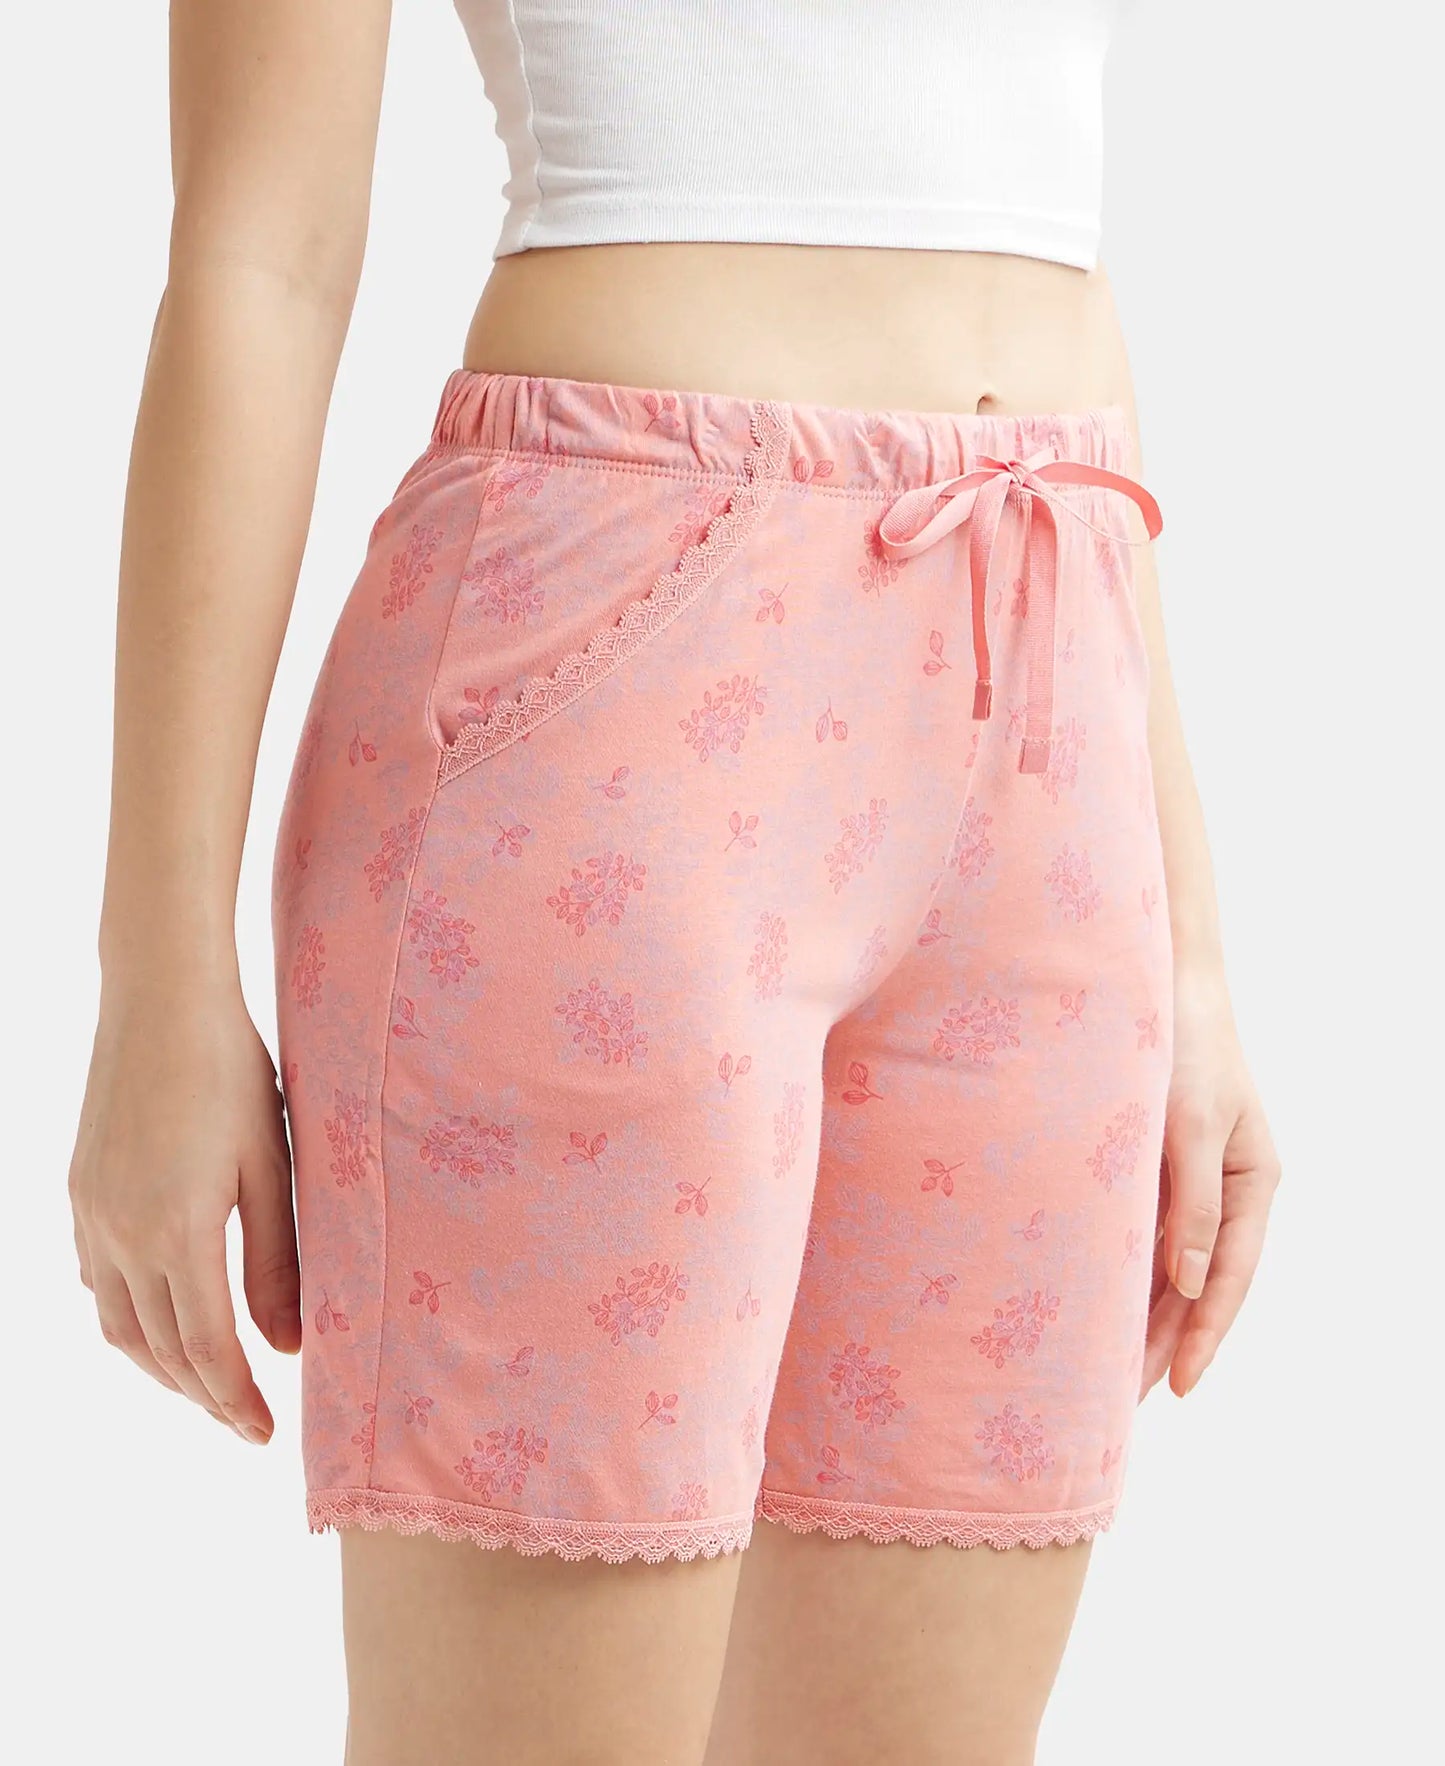 Micro Modal Cotton Relaxed Fit Printed Shorts with Side Pockets - Peach Blossom Assorted Prints-2